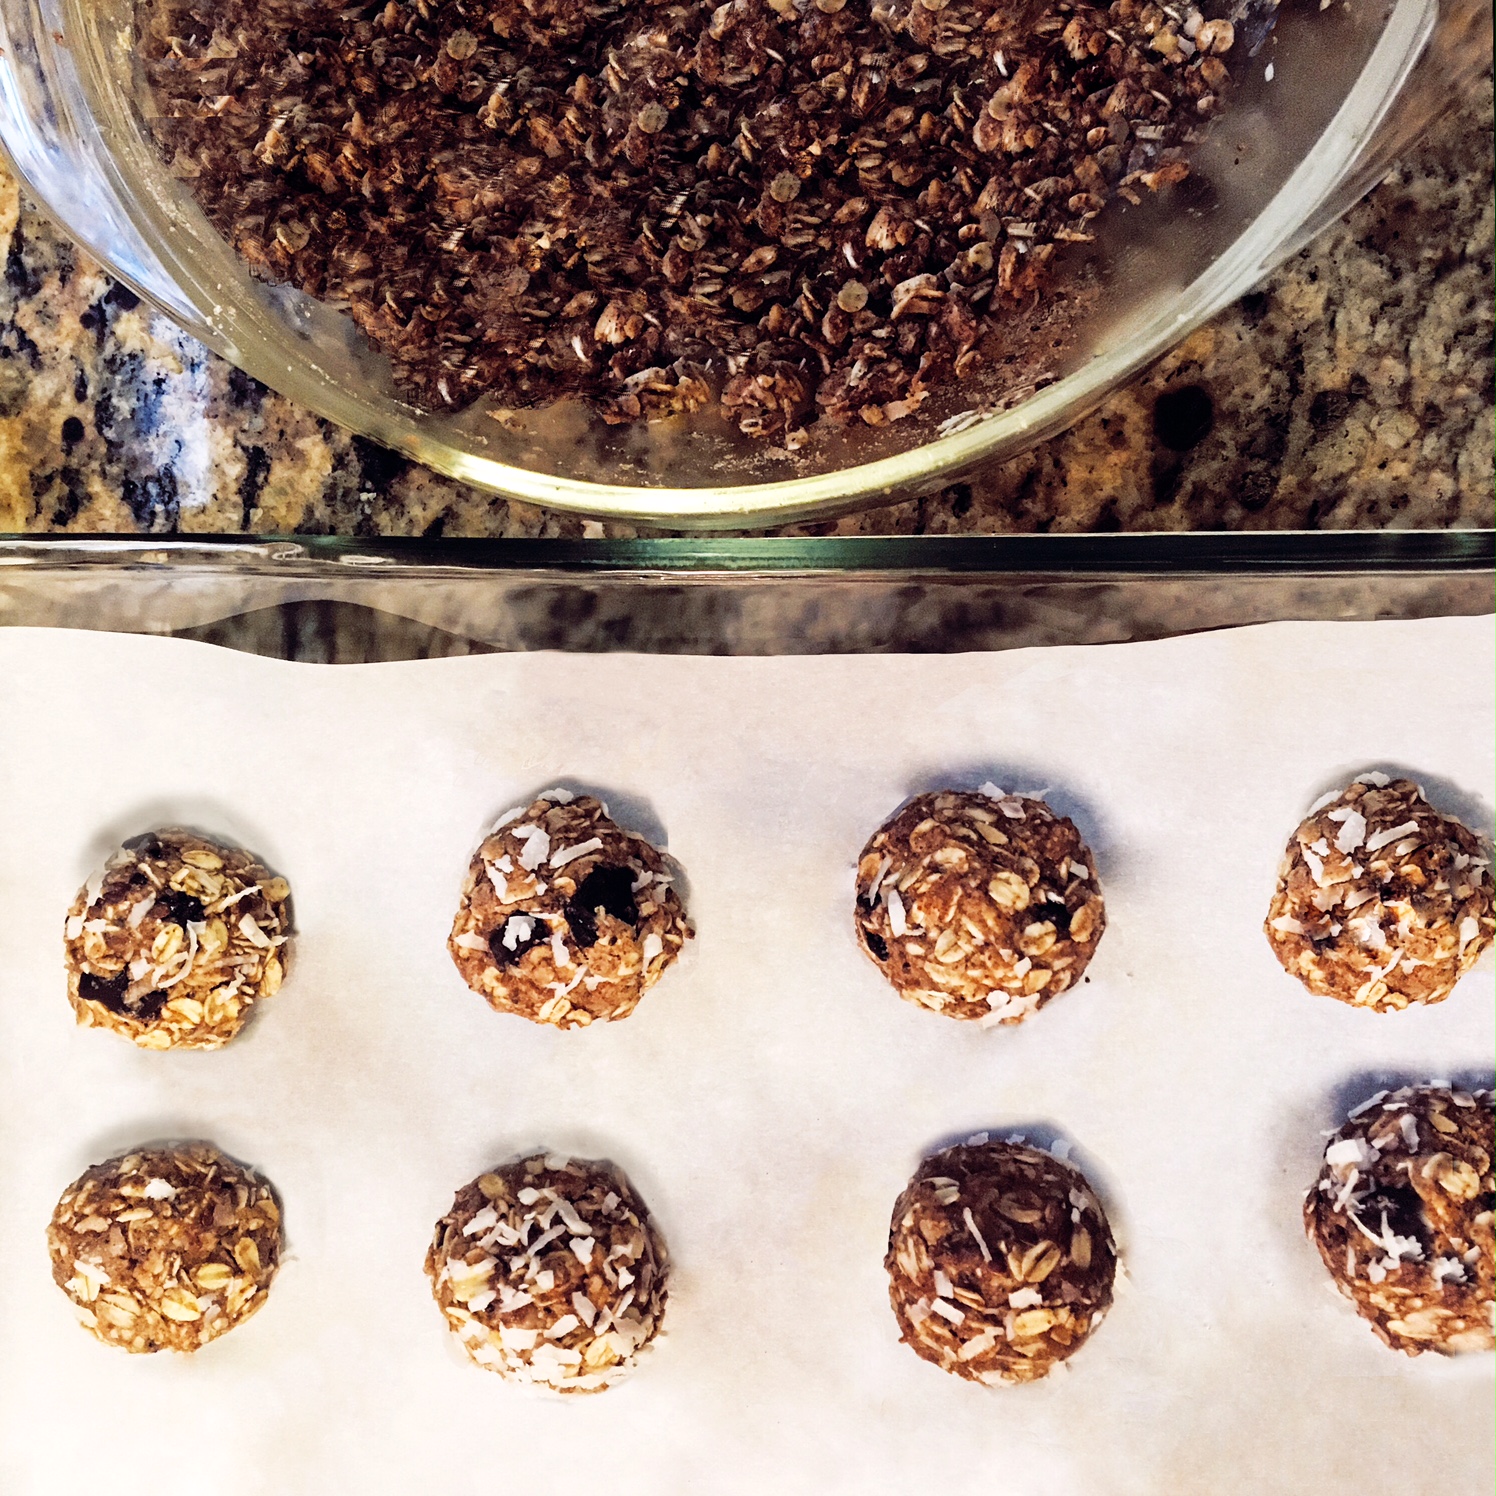 Chocolate Protein Energy Bites - Love to be in the Kitchen